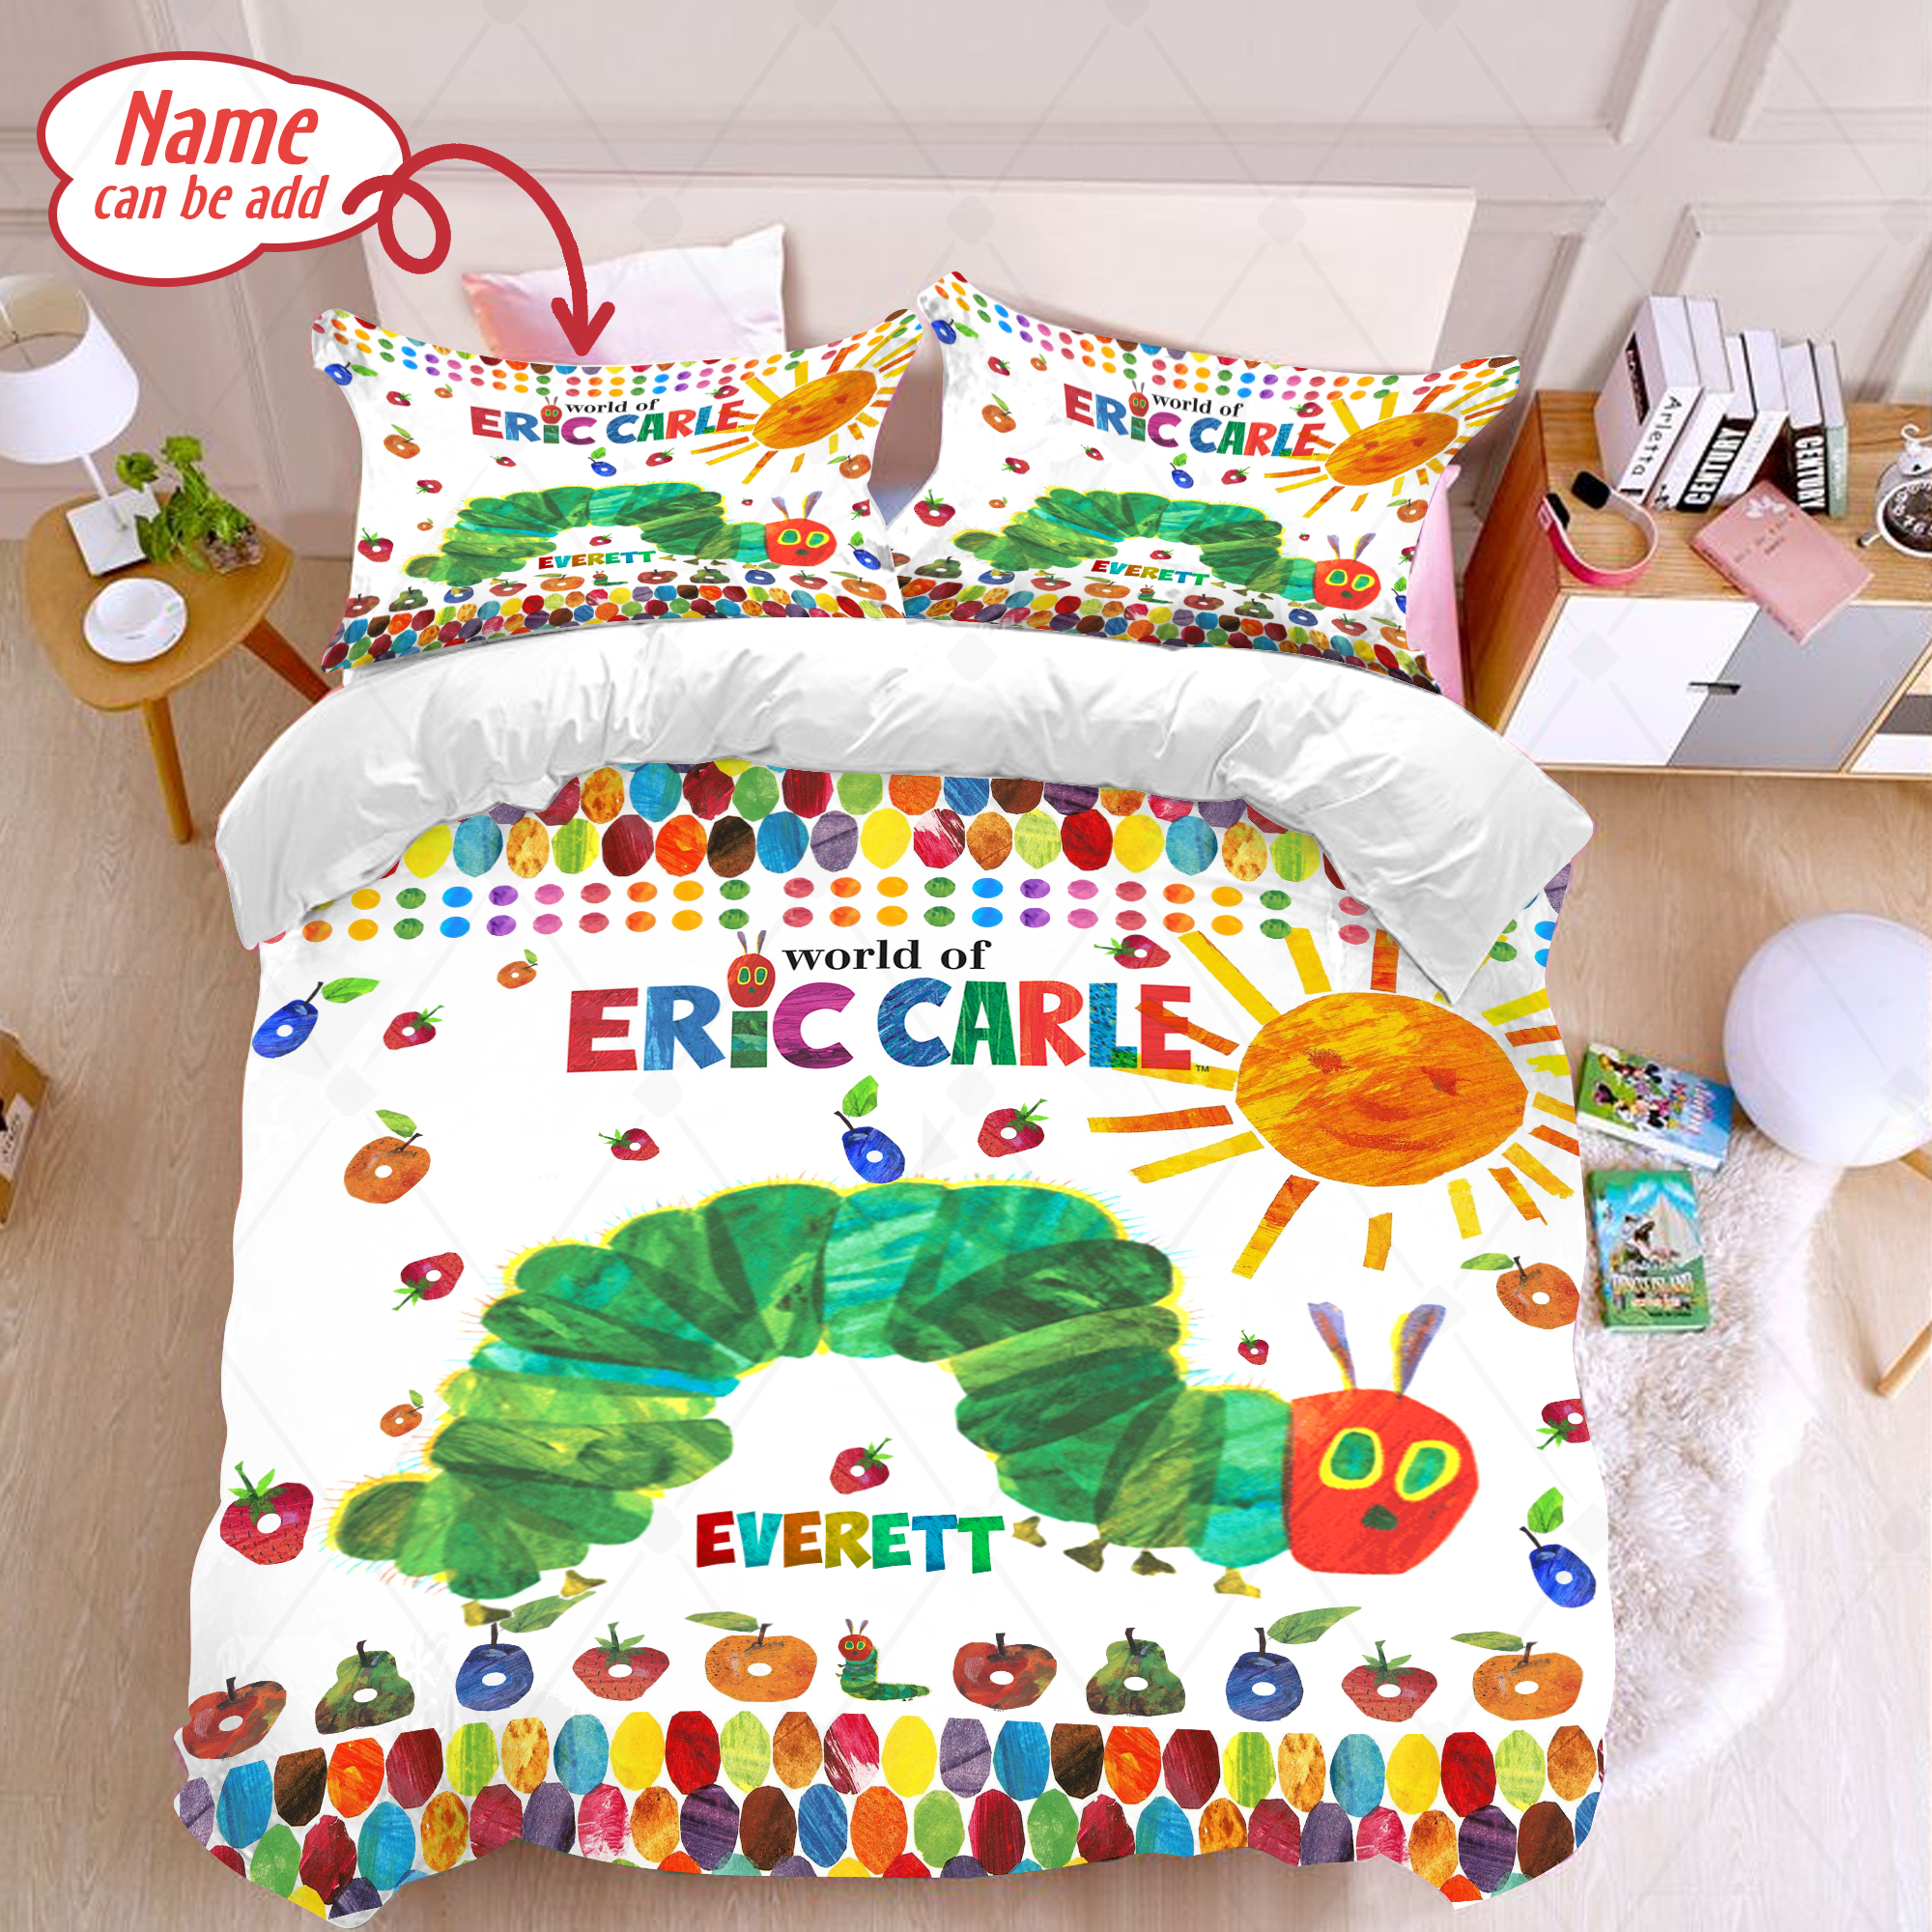 Personalized The Very Hungry Caterpillar Duvet Cover And Pillowcase Hungry Caterpillar Bedding Set Kids Bedding Sets Eric Carle Fan Gifts